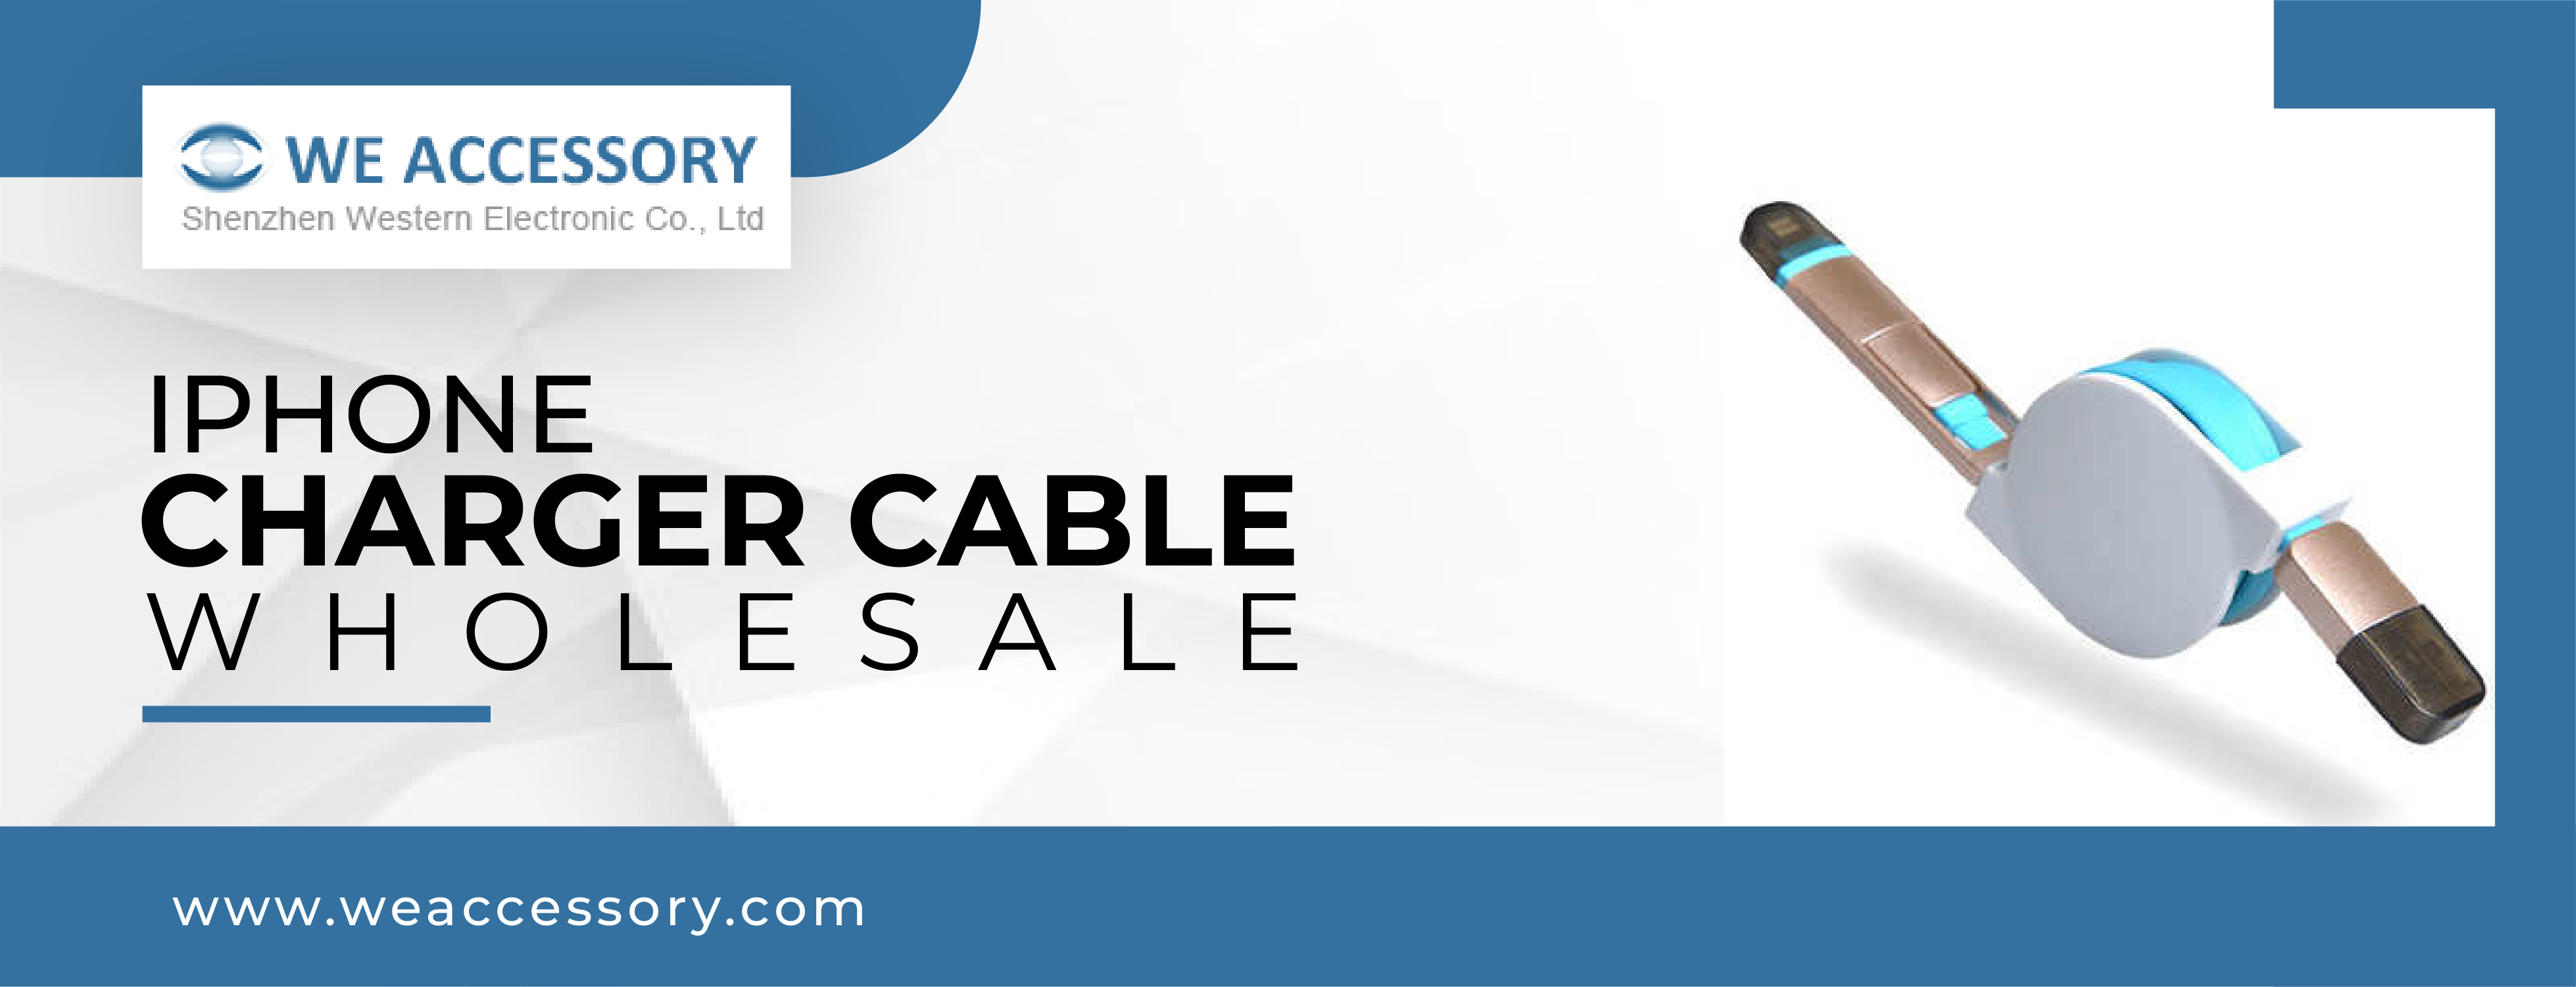 iphone charger cable wholesale